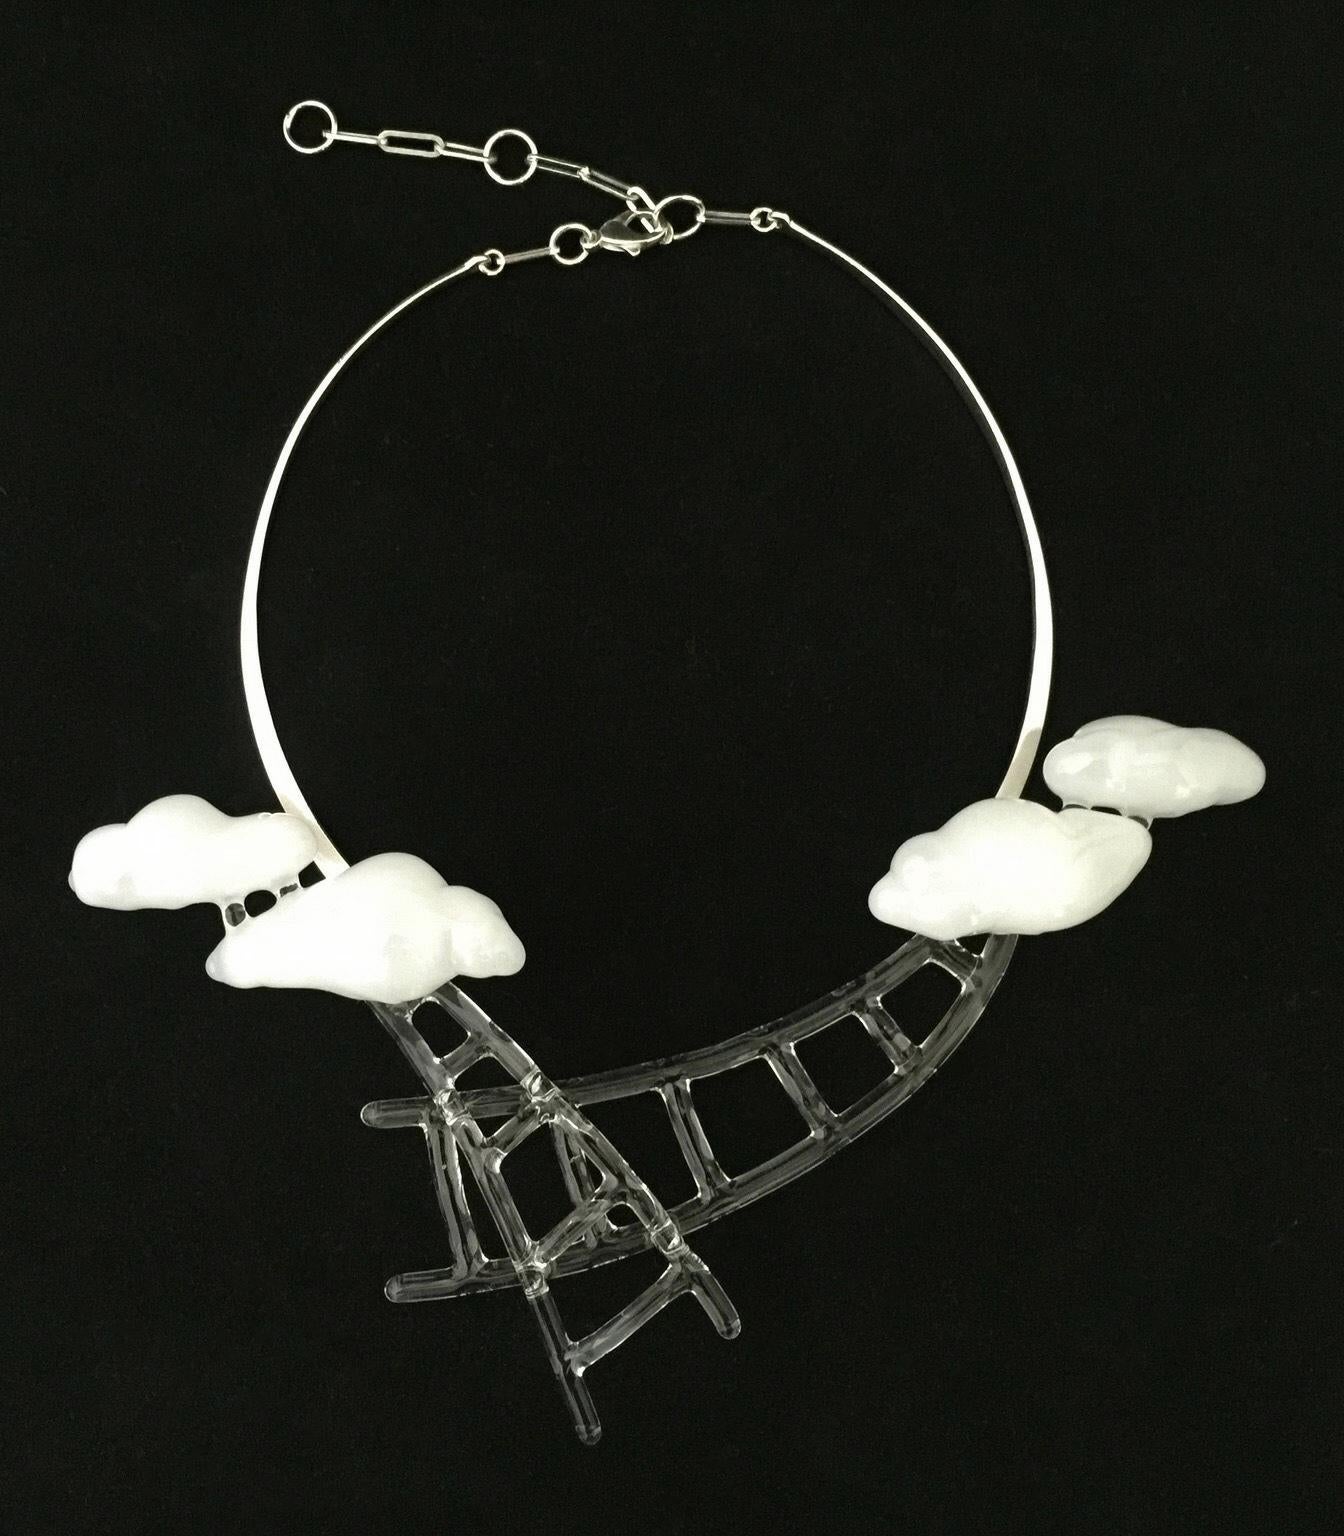 "Stairway III" by Eunsuh Choi is a glass and silver necklace featuring clouds and ladders. The glass is flameworked borosilicate. It is of variable dimensions. 

Eunsuh Choi has exhibited internationally including at the European Museum for Modern